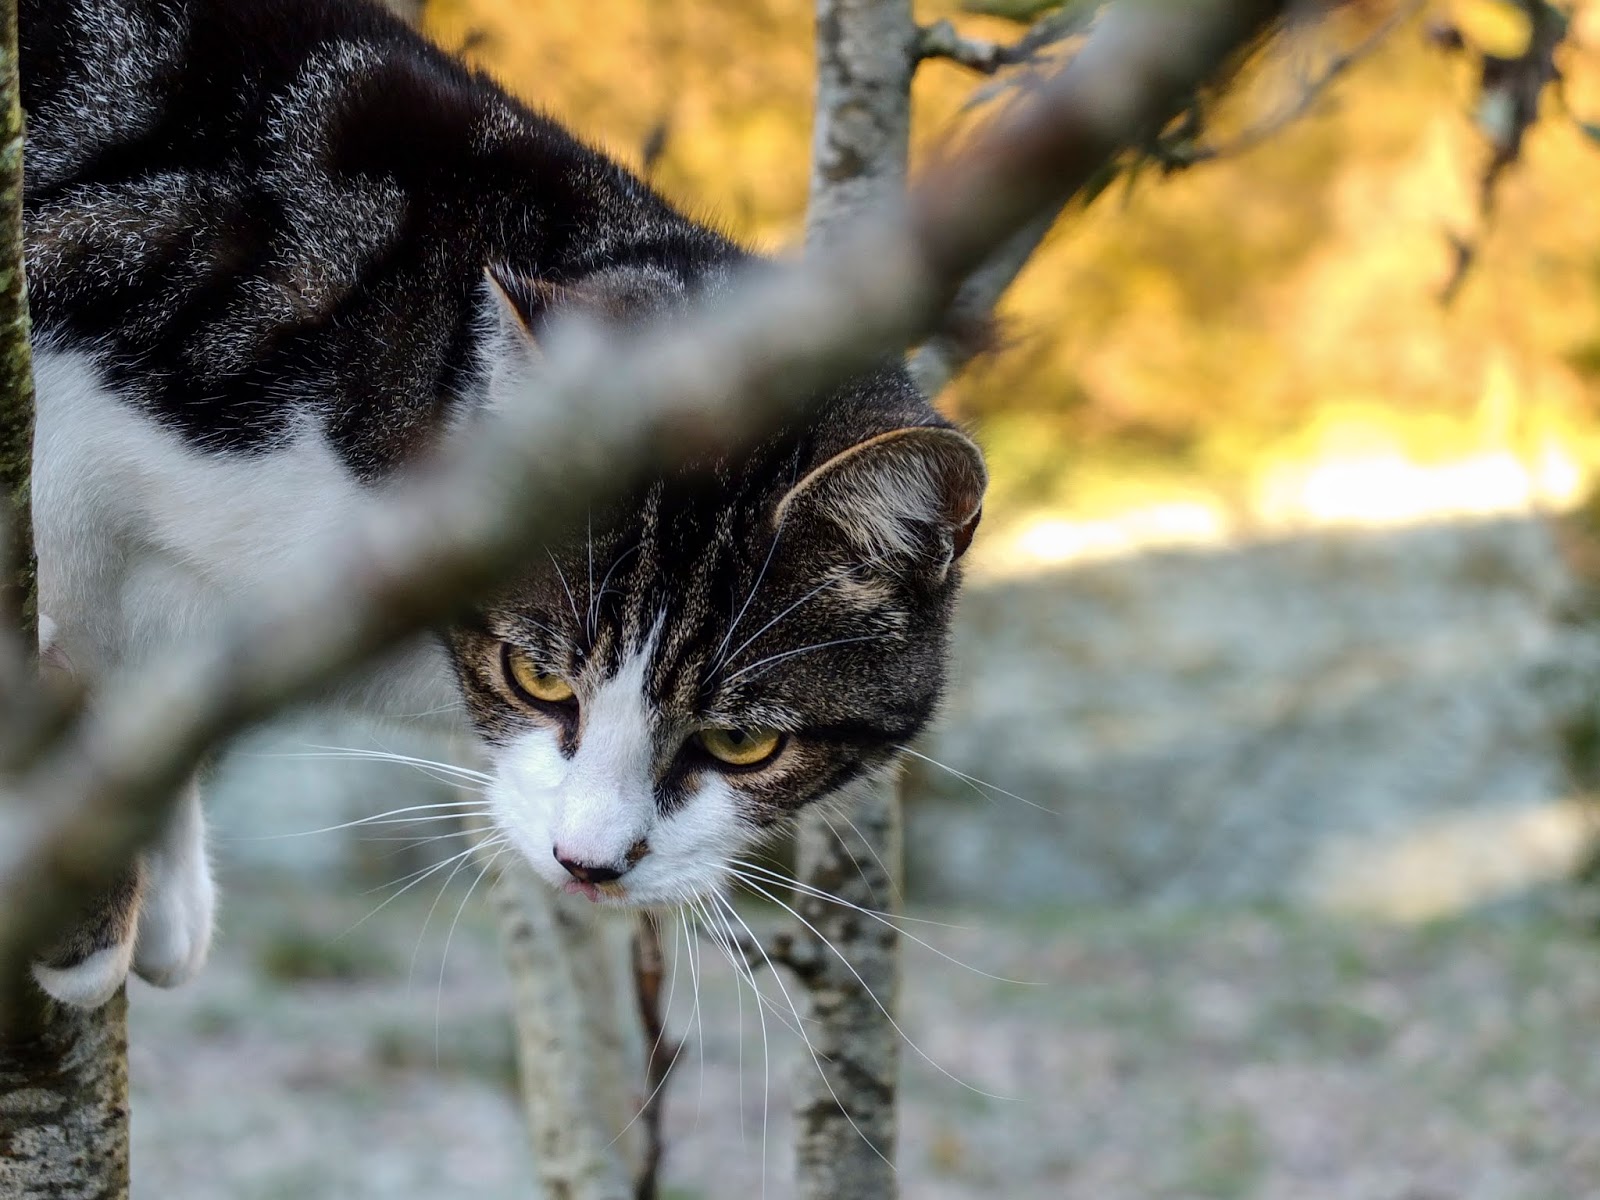 A cat climbing down a tree on a frosty morning.